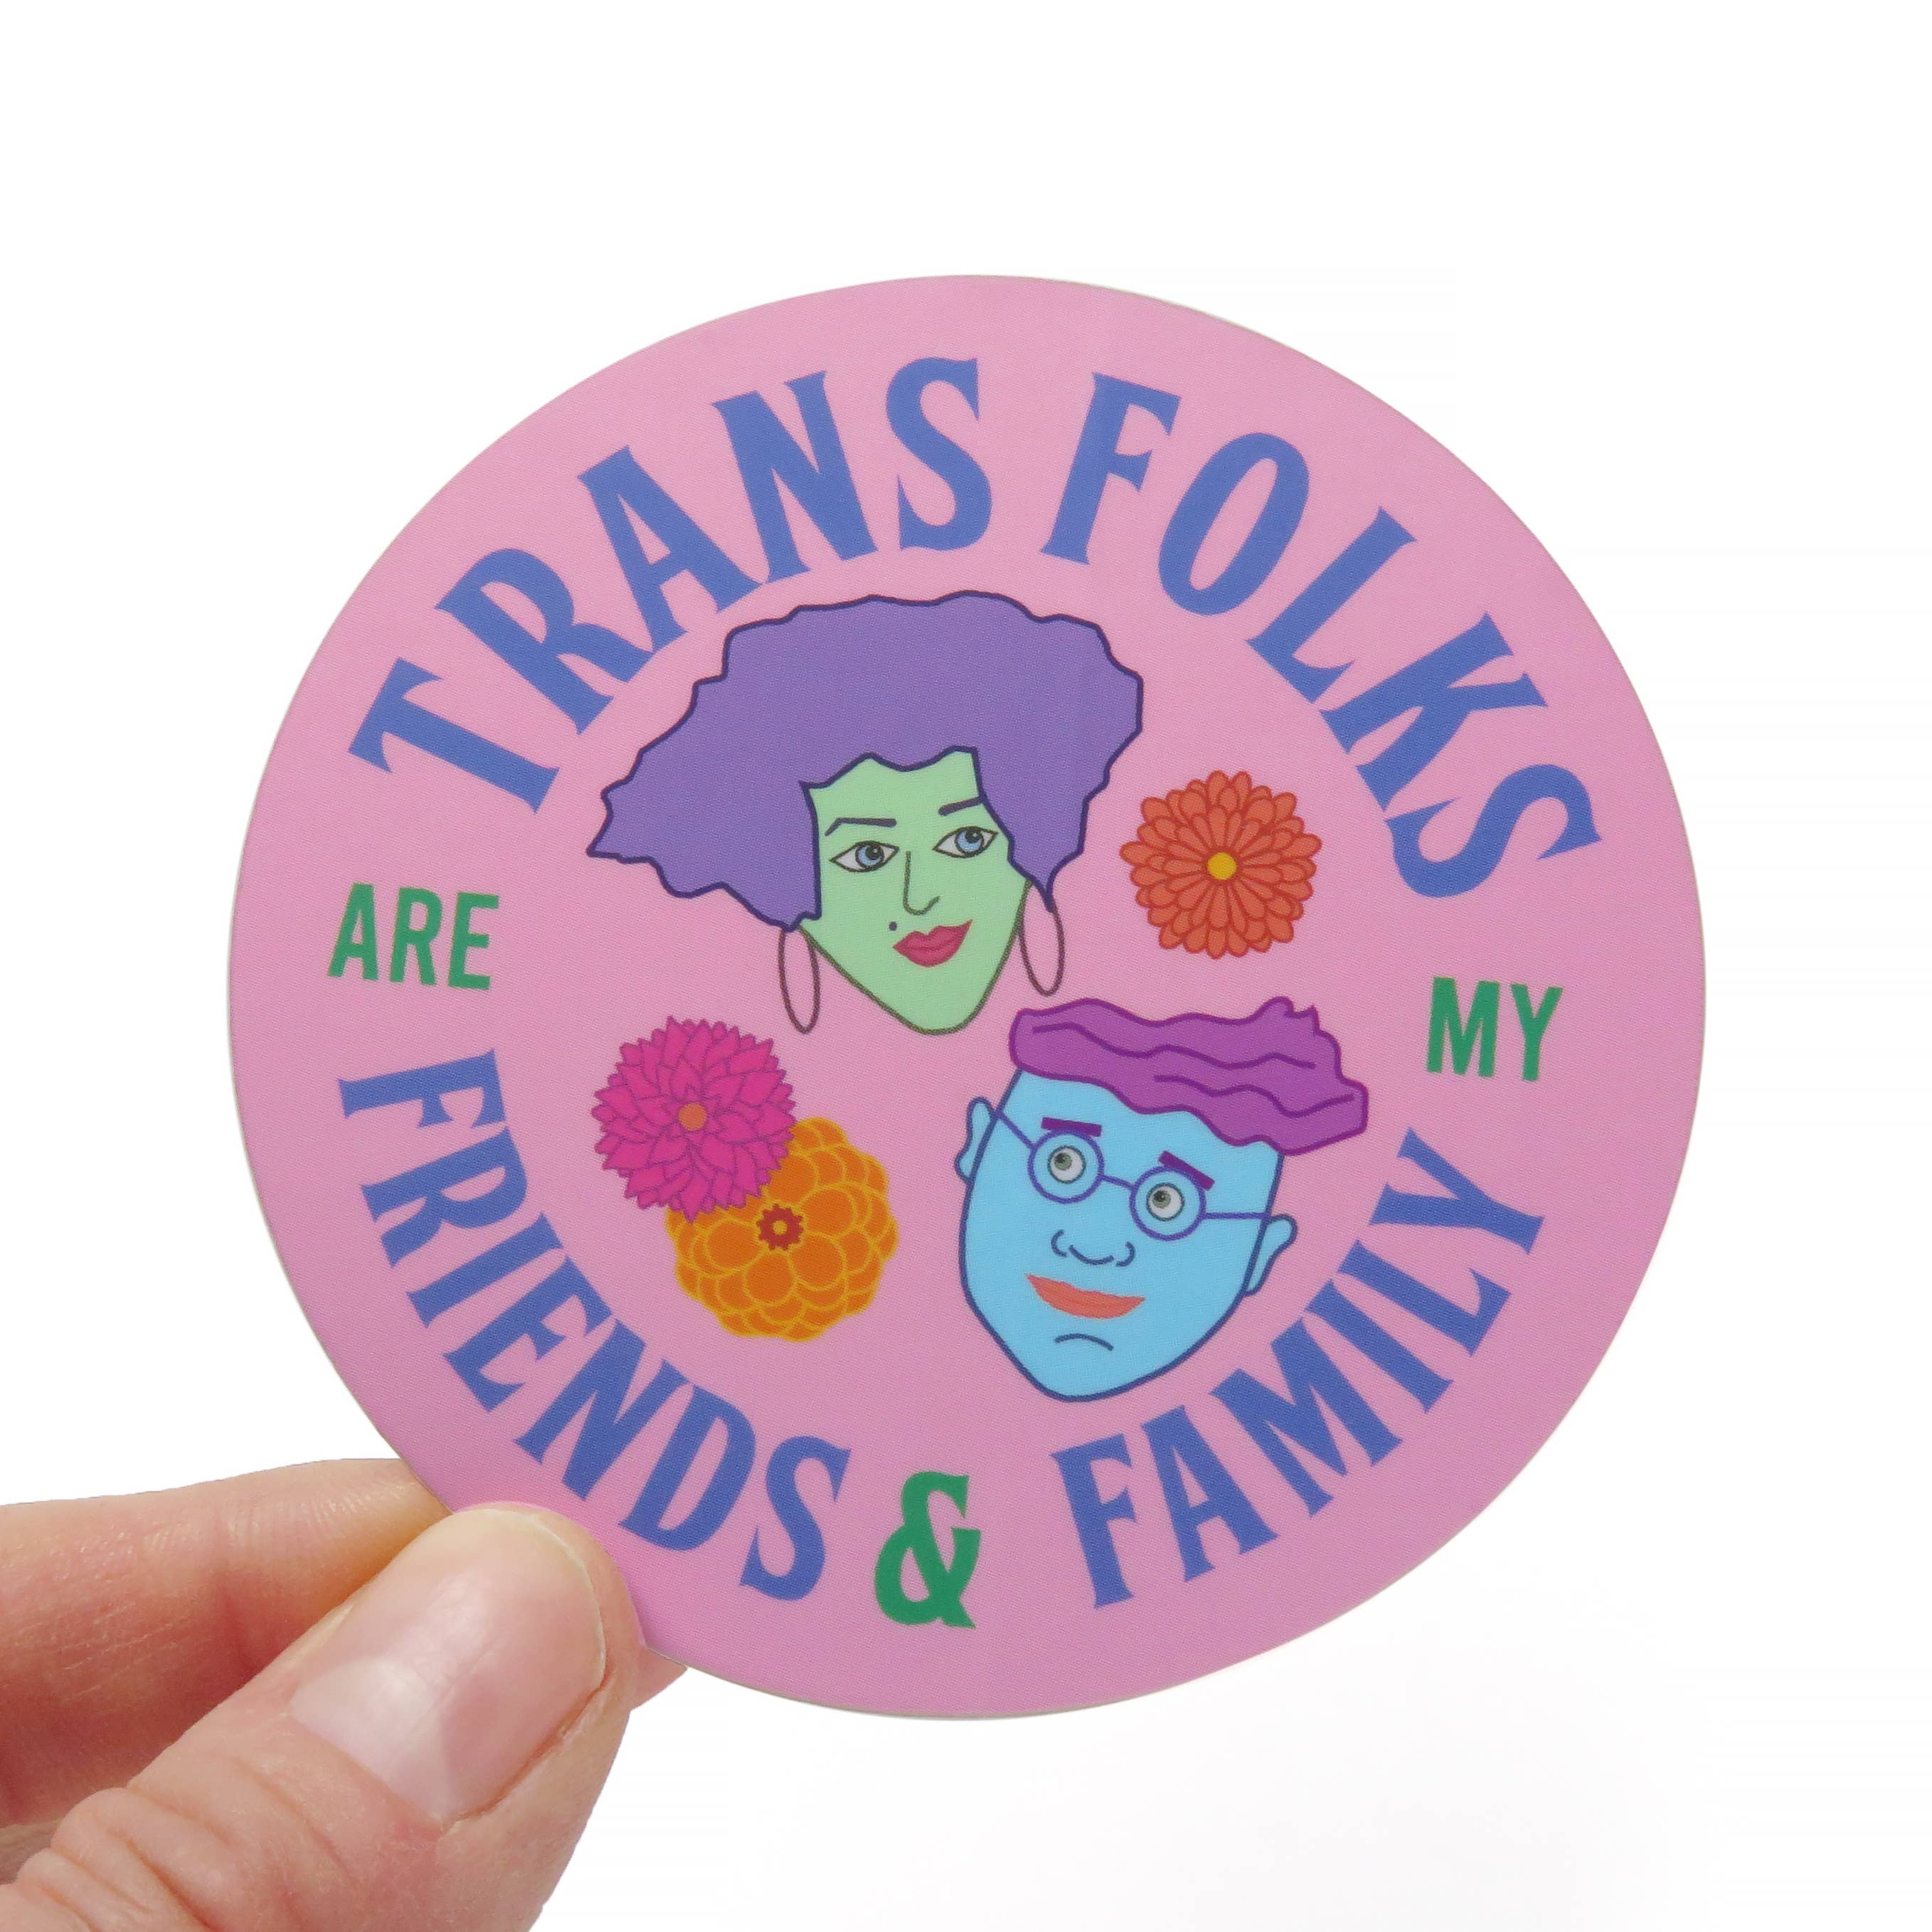 Trans Folks are my Friends and Family Sticker